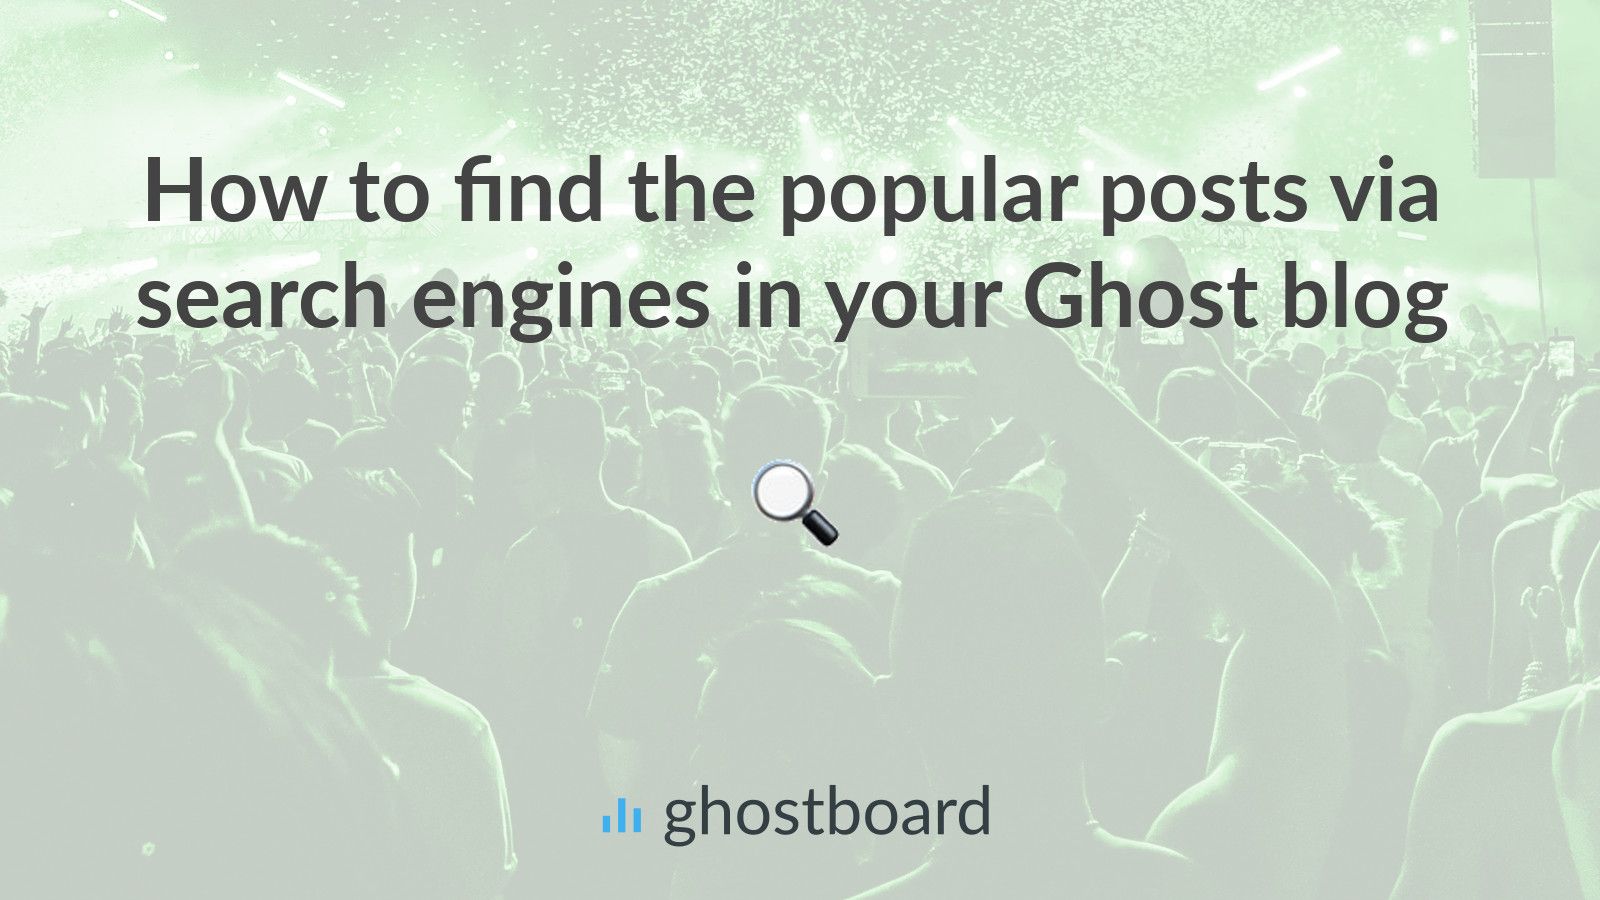 How to find the popular posts via search engines in your Ghost blog